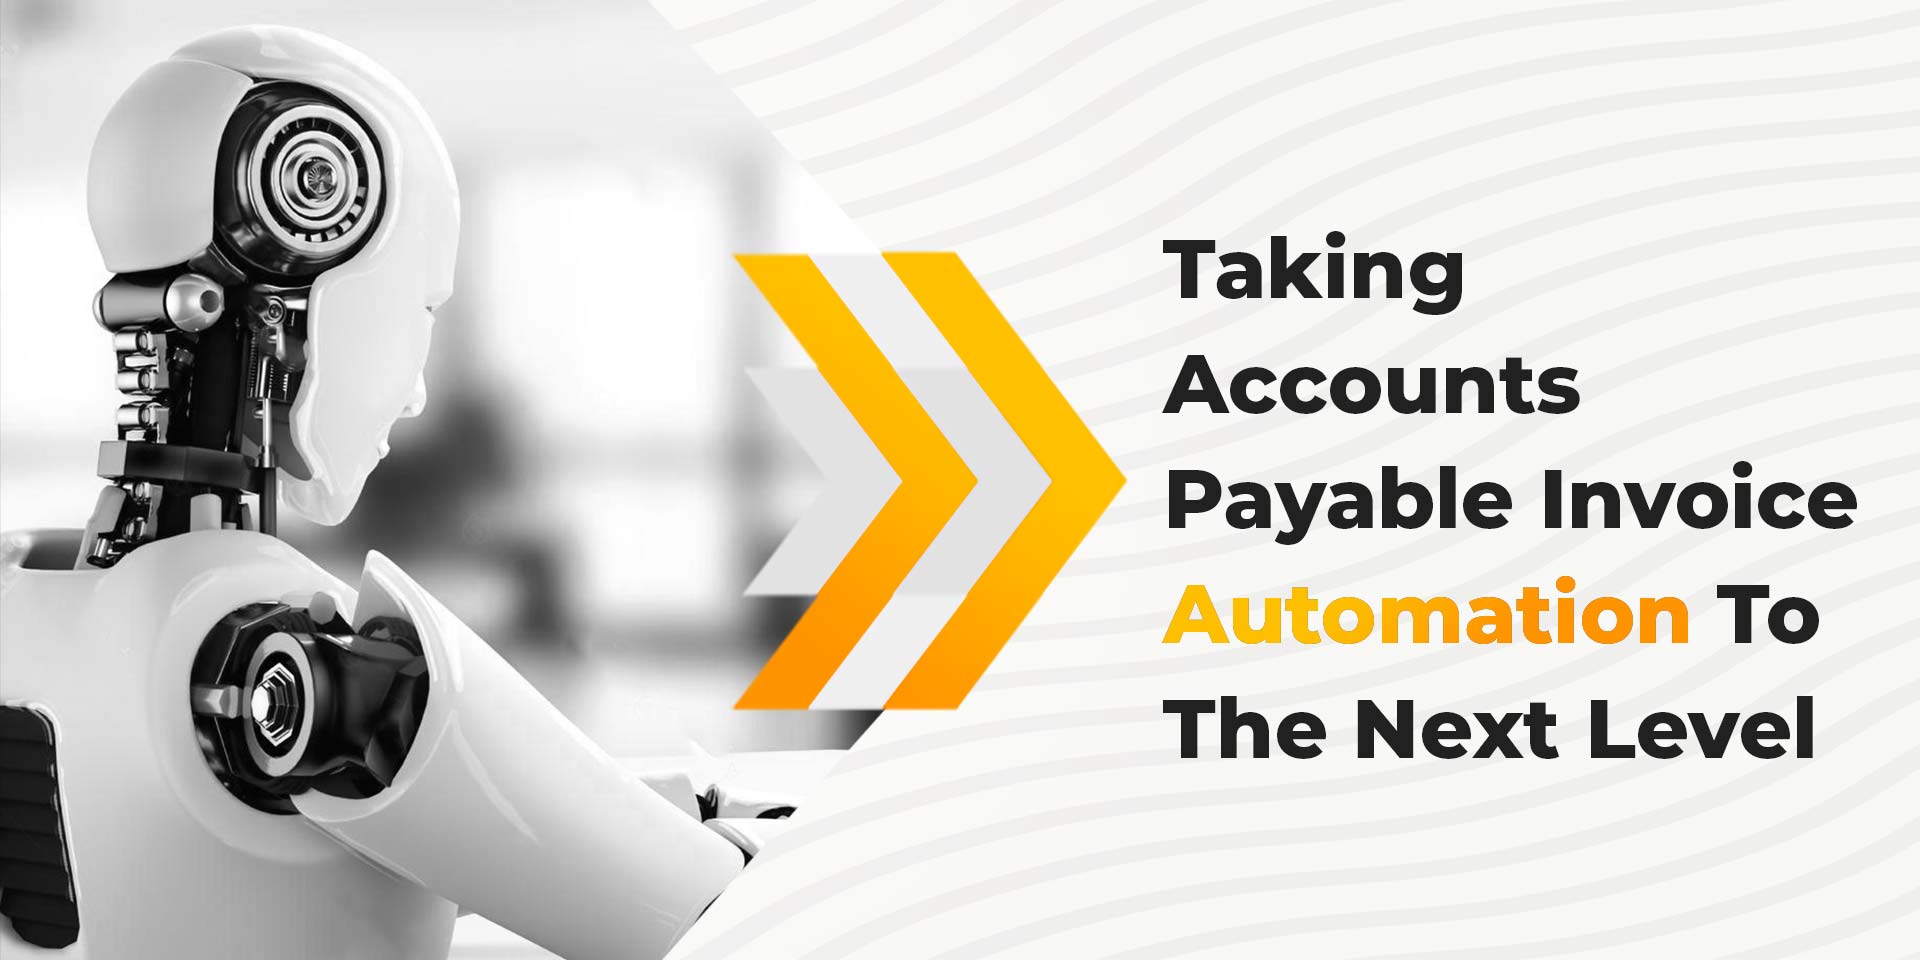 Taking Accounts Payable Invoice Automation To The Next Level